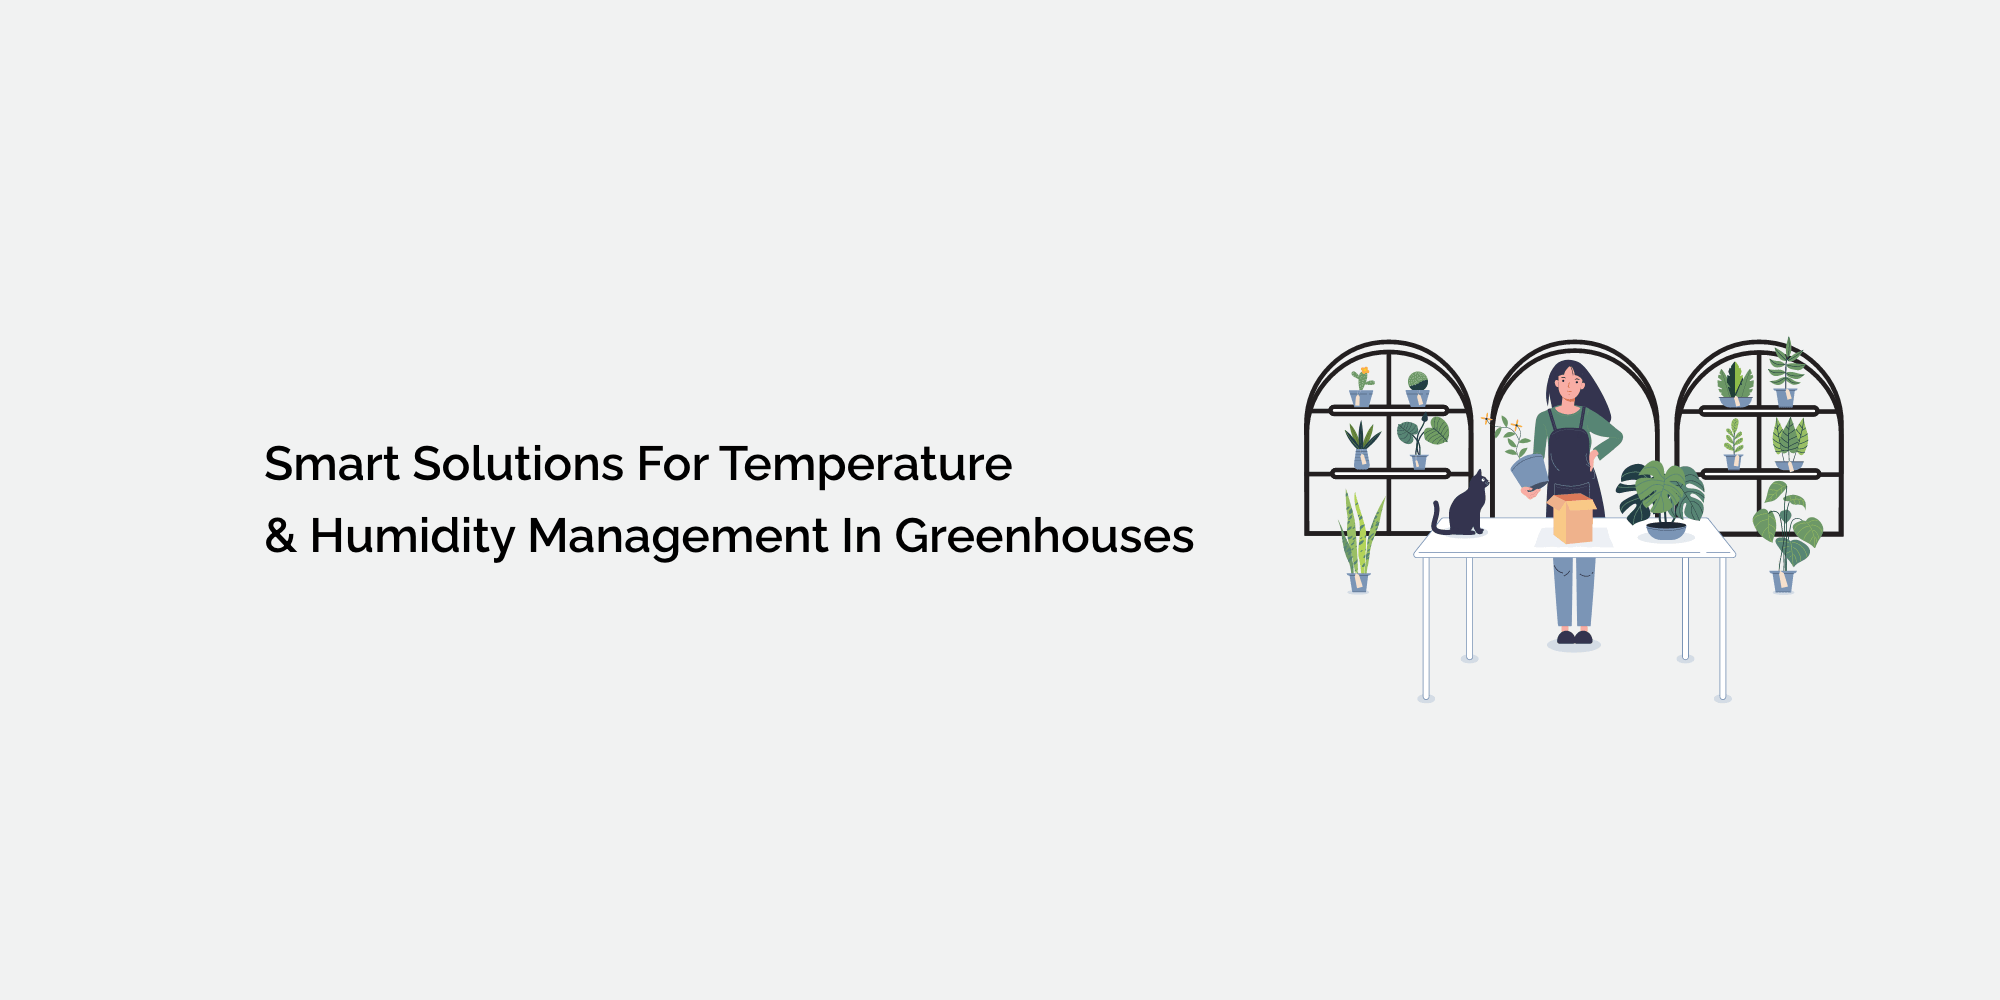 Smart Solutions for Temperature and Humidity Management in Greenhouses